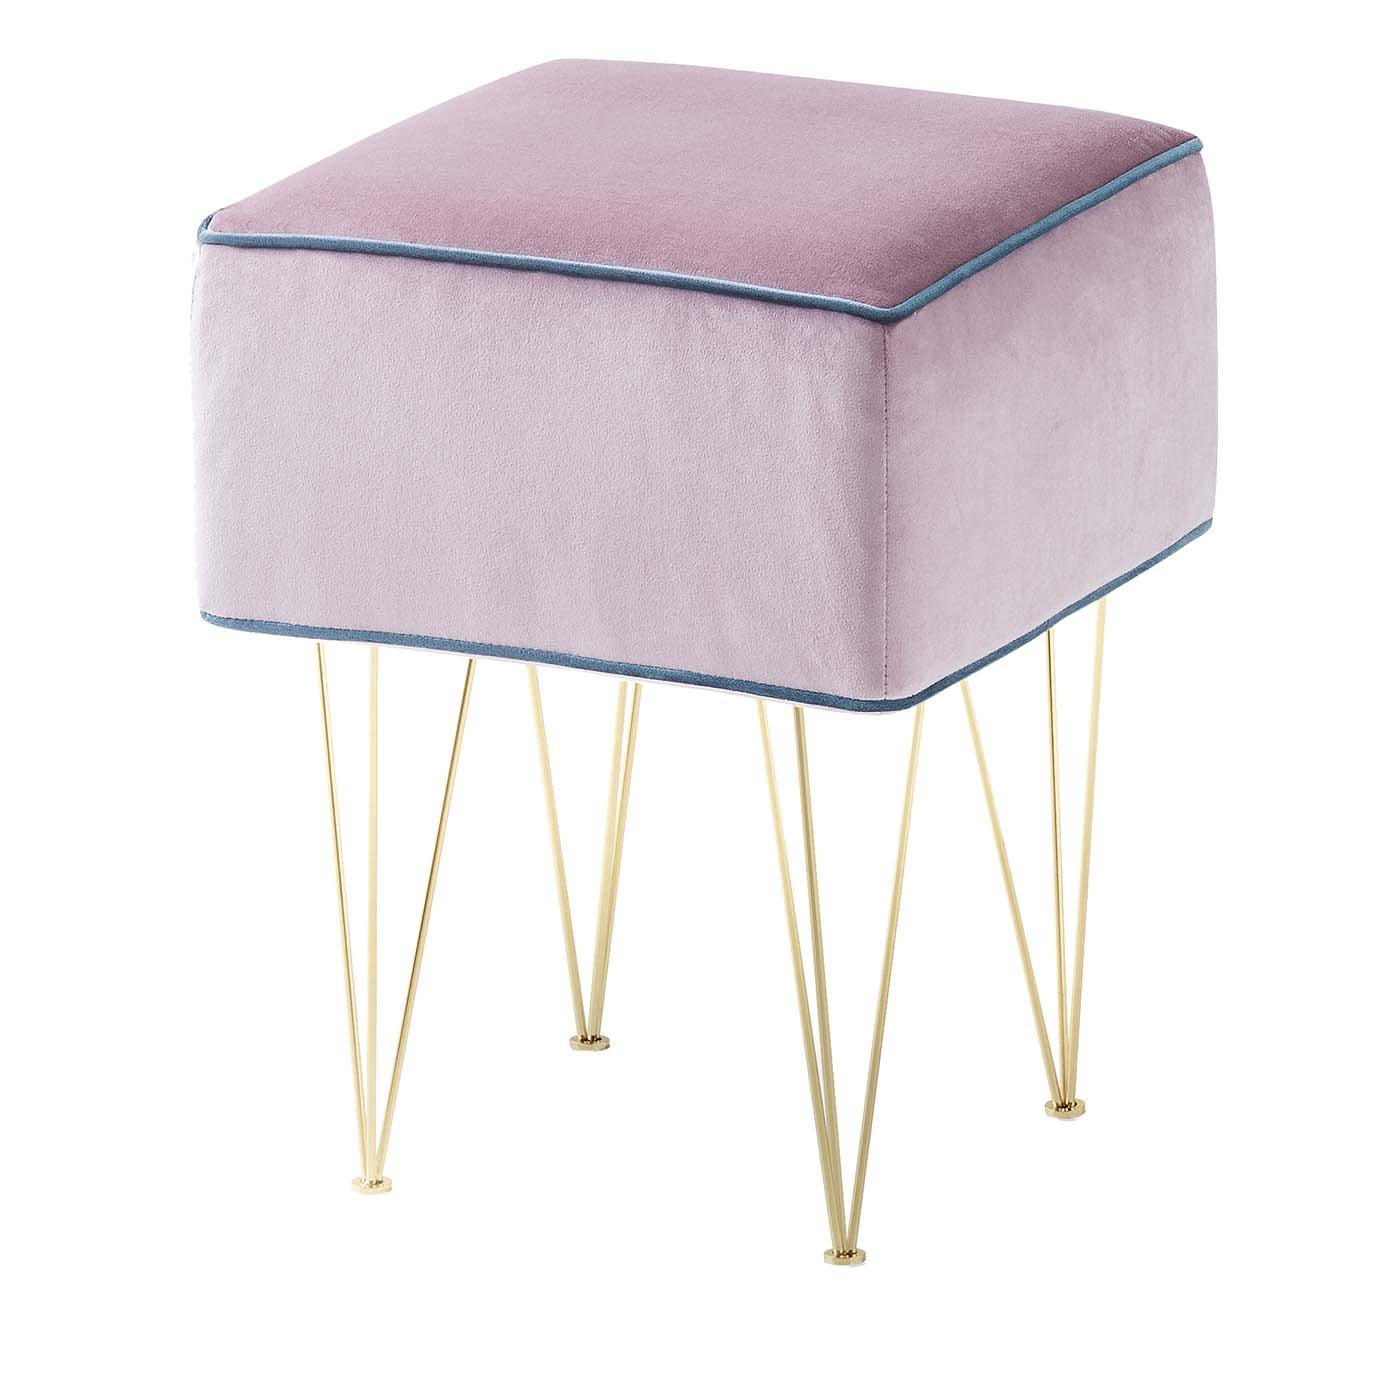 Pills Small Pink Square pouf with Gold Legs - Gam Home